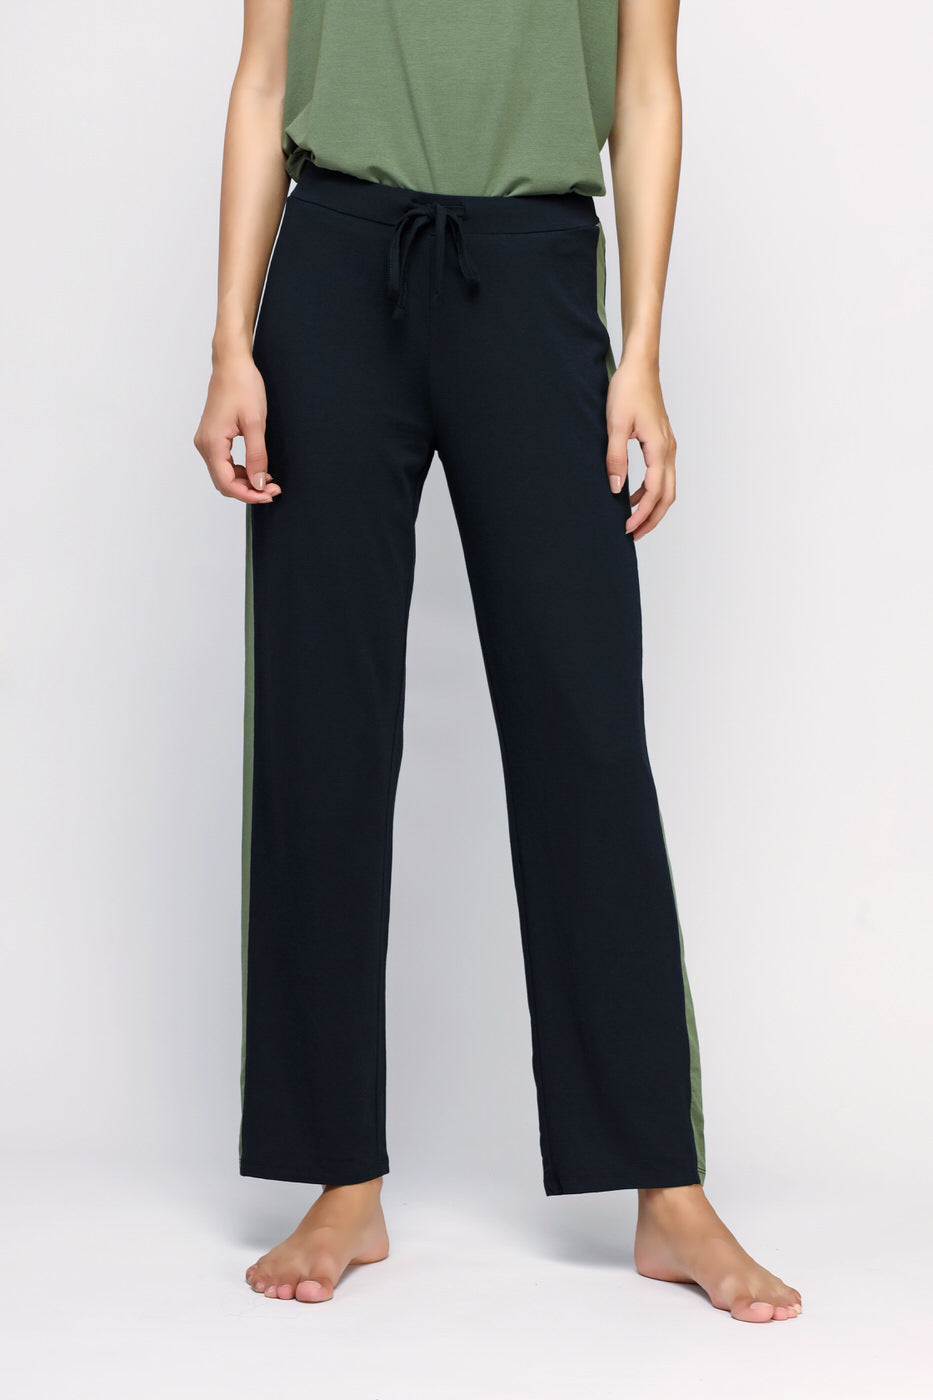 Movement Black Lounge Pant With Side Green Stripe